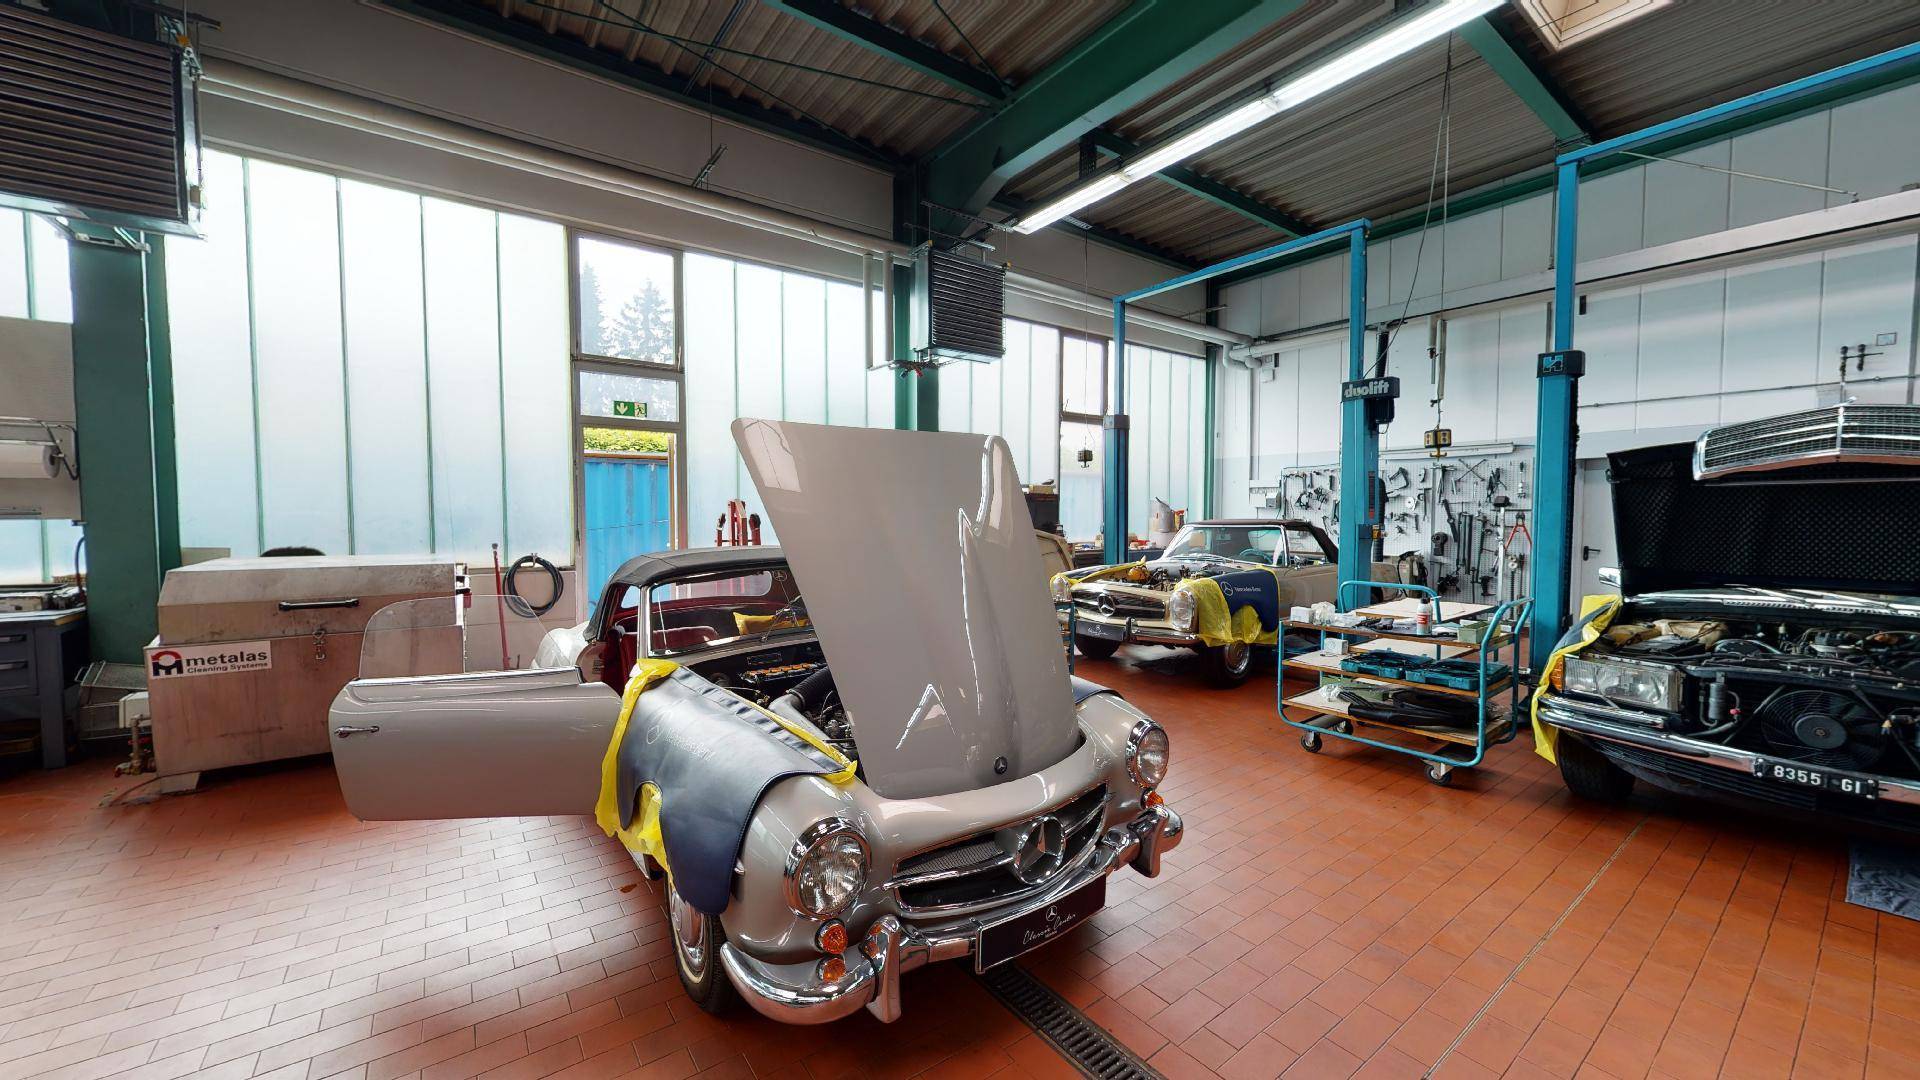 The Oldtimer Garage of Mercedes-Benz: a Virtual Tour Experience